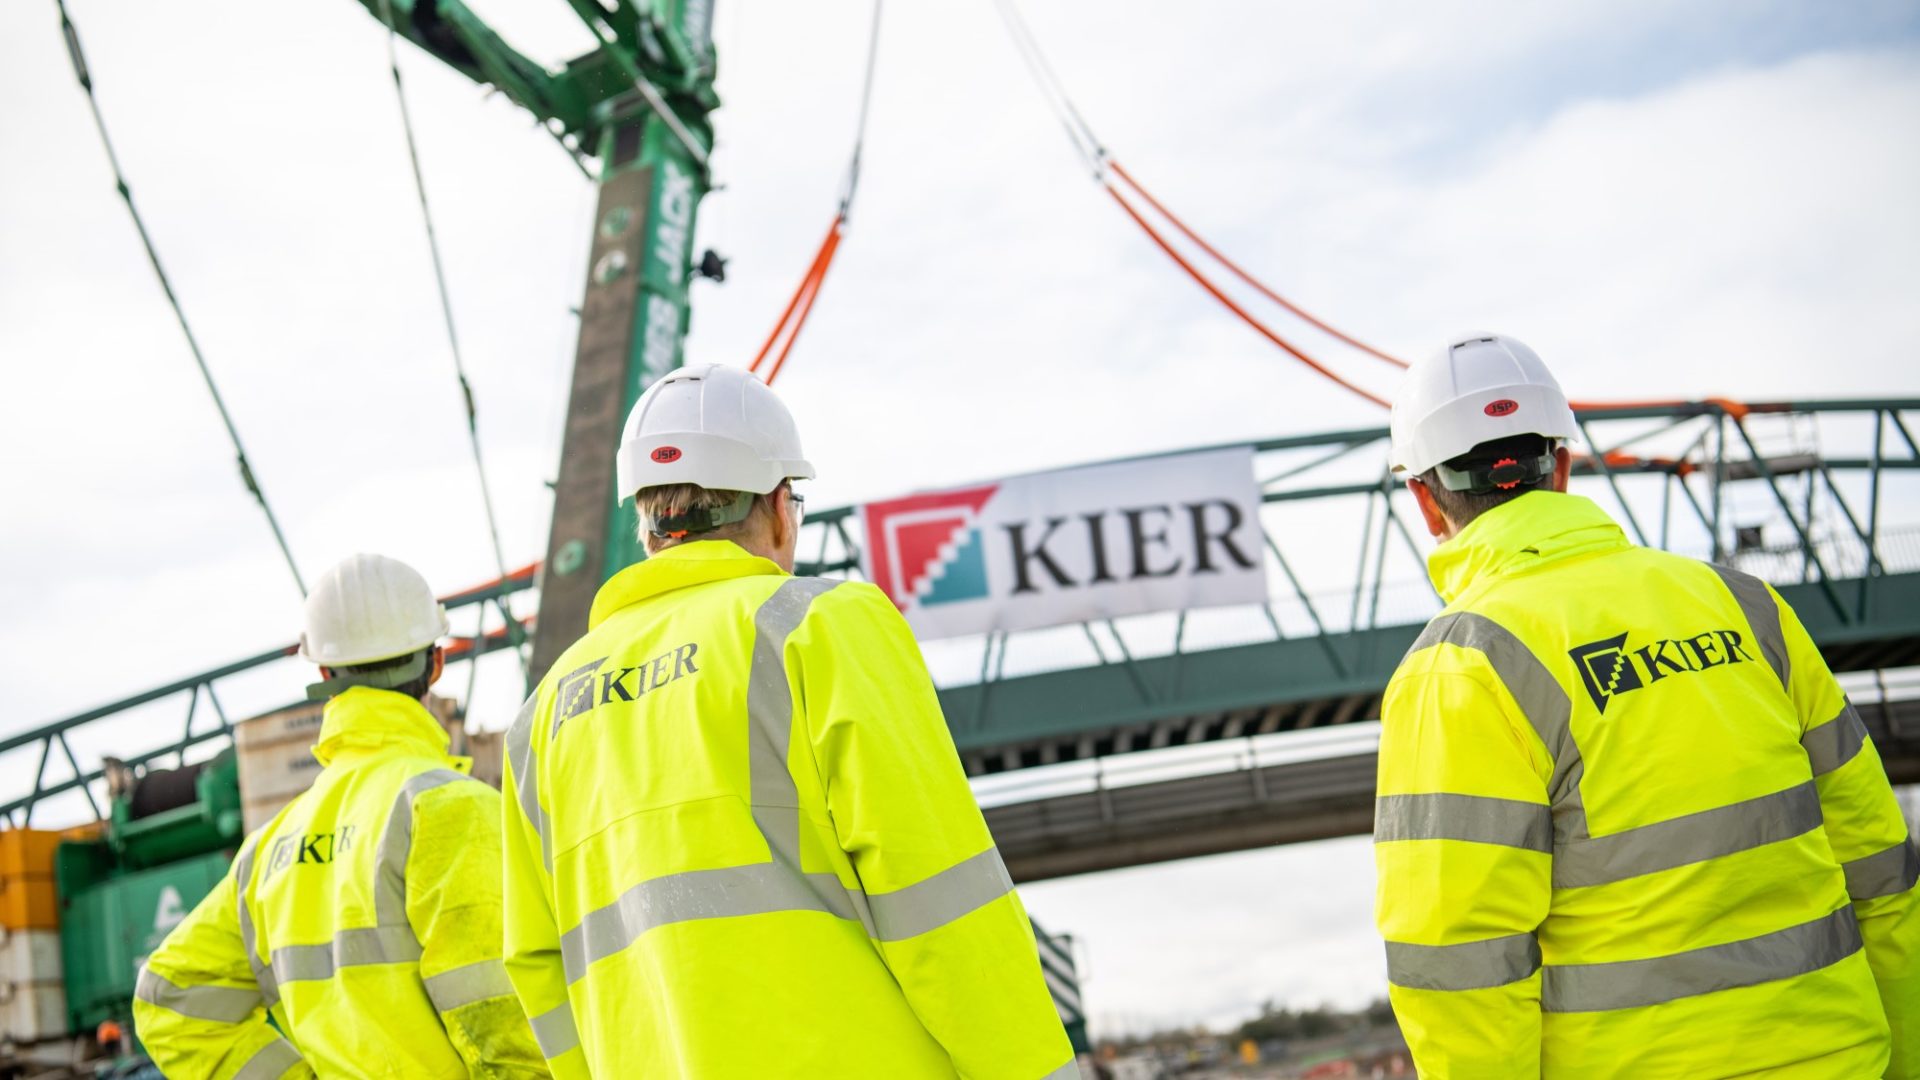 Kier’s strategy has promoted a digital-first culture across its projects (image: Kier)